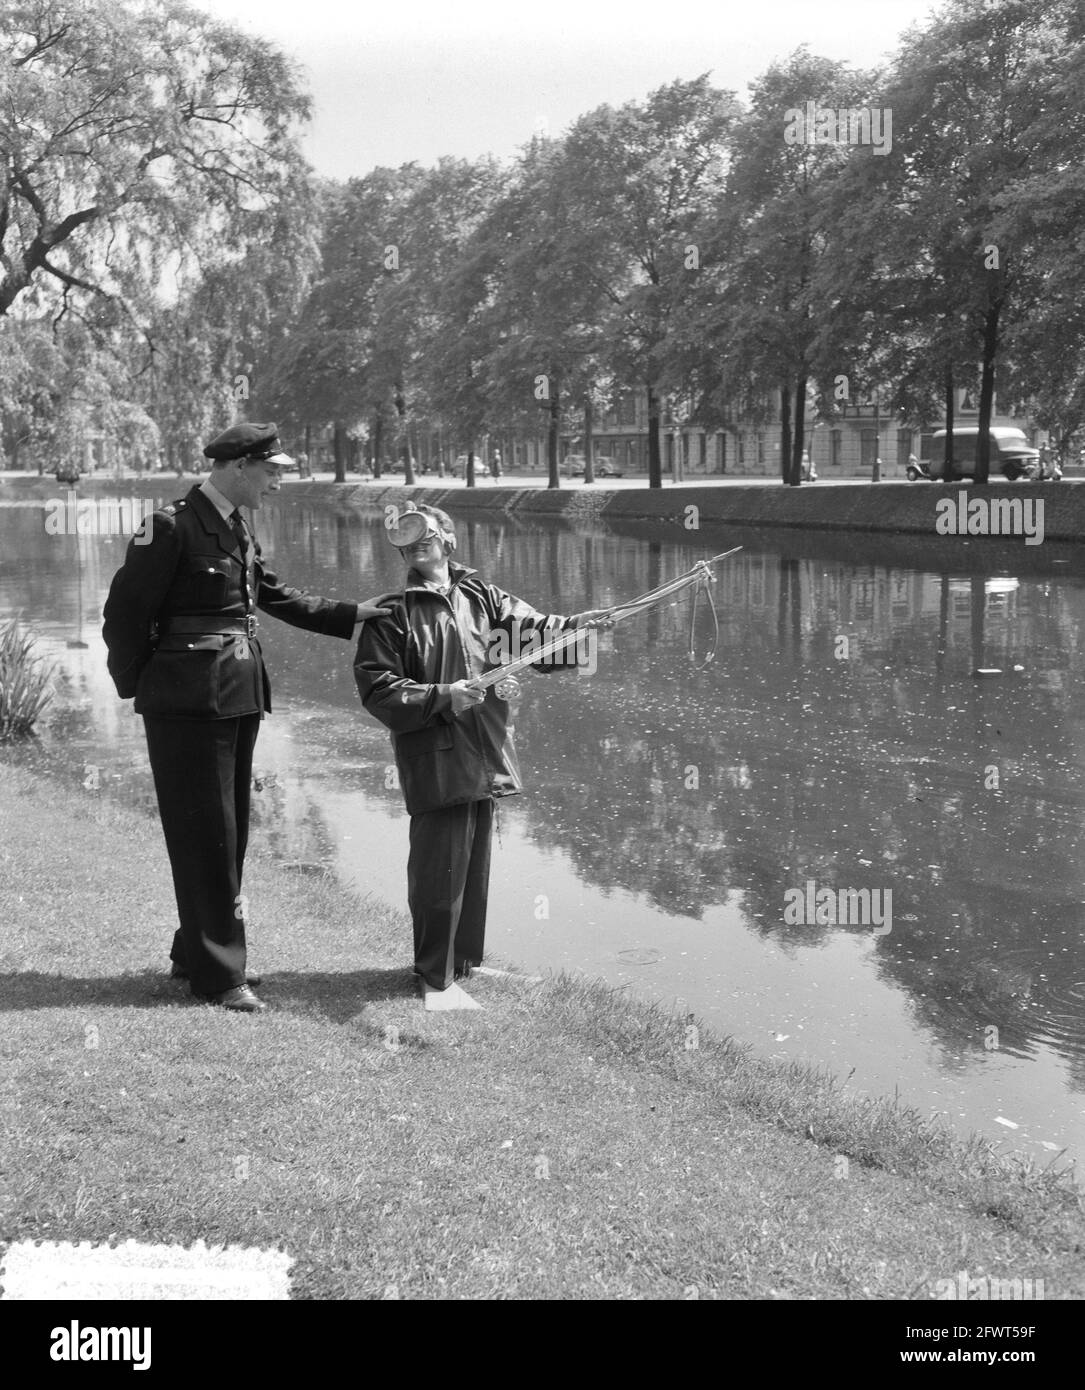 https://c8.alamy.com/comp/2FWT59F/new-fishing-tackle-including-underwater-fishing-with-harpoon-gun-etc-28-may-1956-the-netherlands-20th-century-press-agency-photo-news-to-remember-documentary-historic-photography-1945-1990-visual-stories-human-history-of-the-twentieth-century-capturing-moments-in-time-2FWT59F.jpg